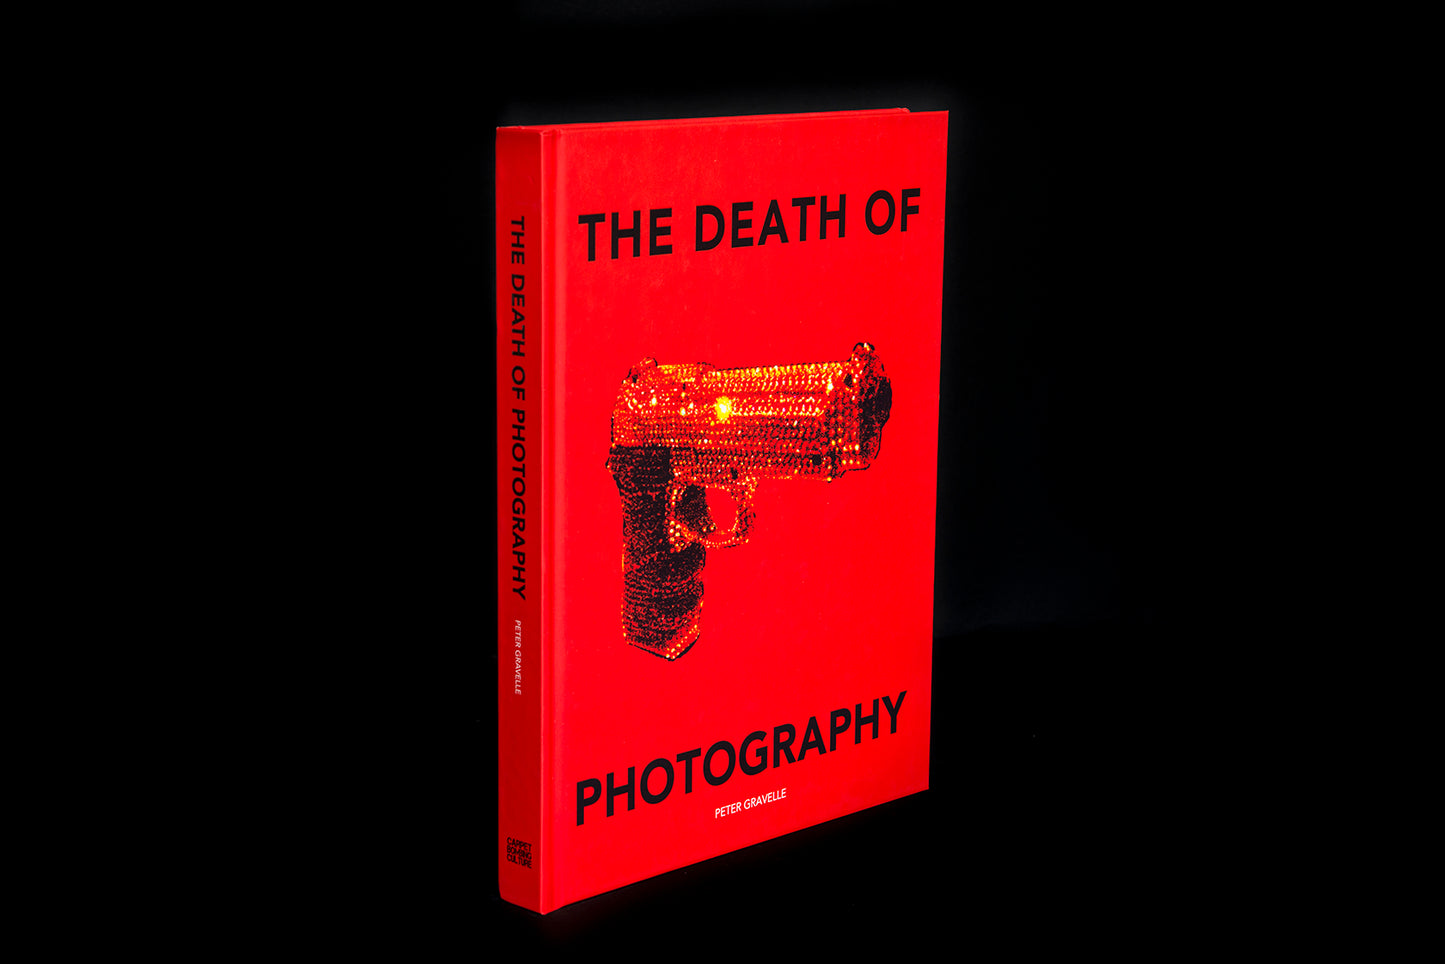 Death of Photography